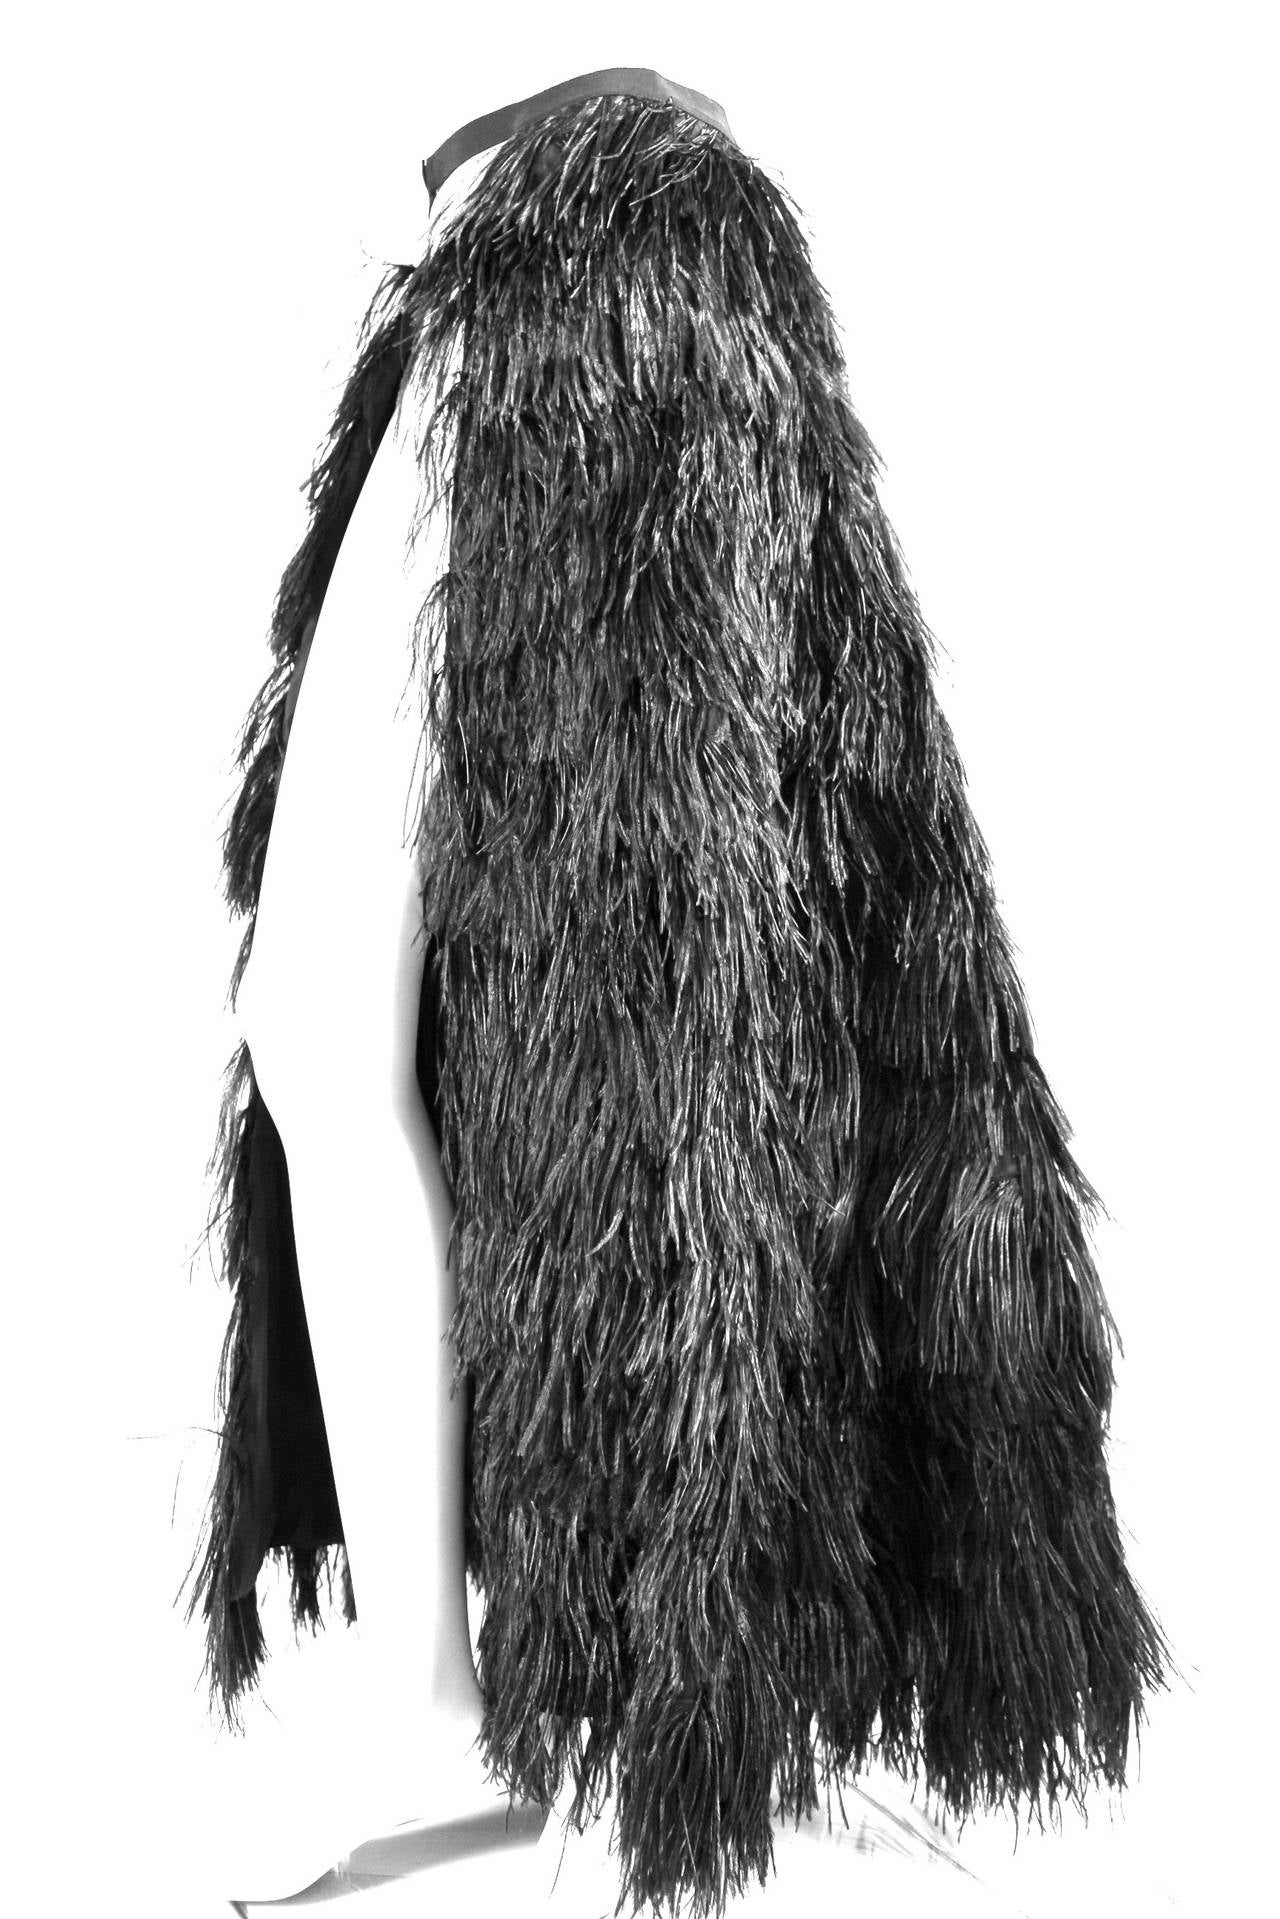 Givenchy Ostrich Feather Overskirt or Cape
Labelled size 38
Full length is 43 inches
Detachable segment on bottom with hook and eye closures means it can also be worn as 28 inch length skirt or cape.